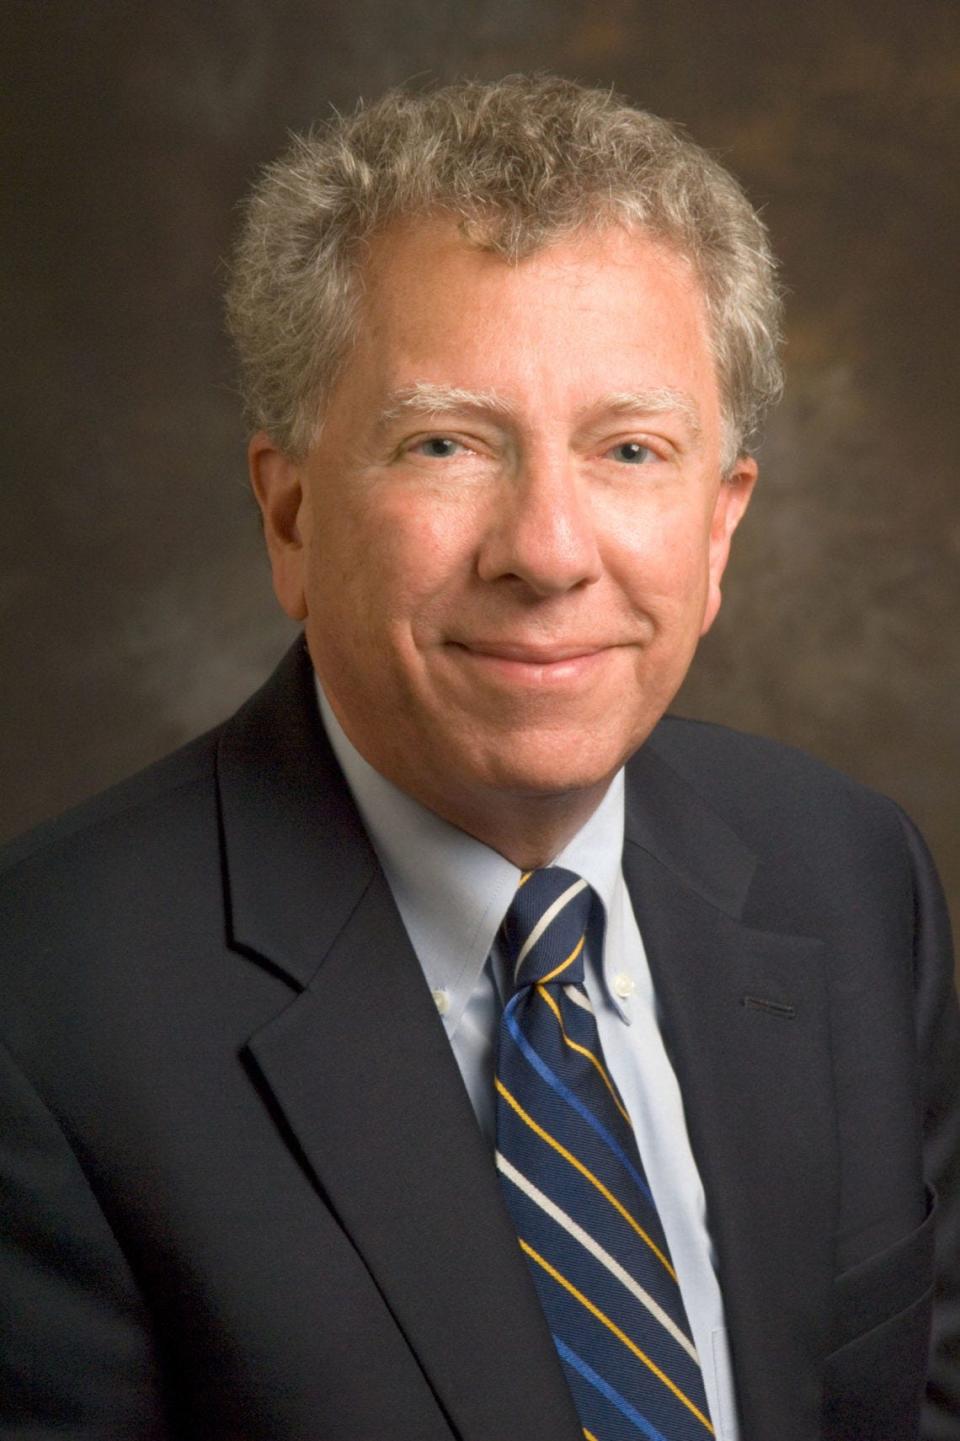 Journalist Hank Klibanoff, a Pulitzer-prize winning journalist, won Senate committee approval Wednesday to serve on the Civil Rights Records Review Board.